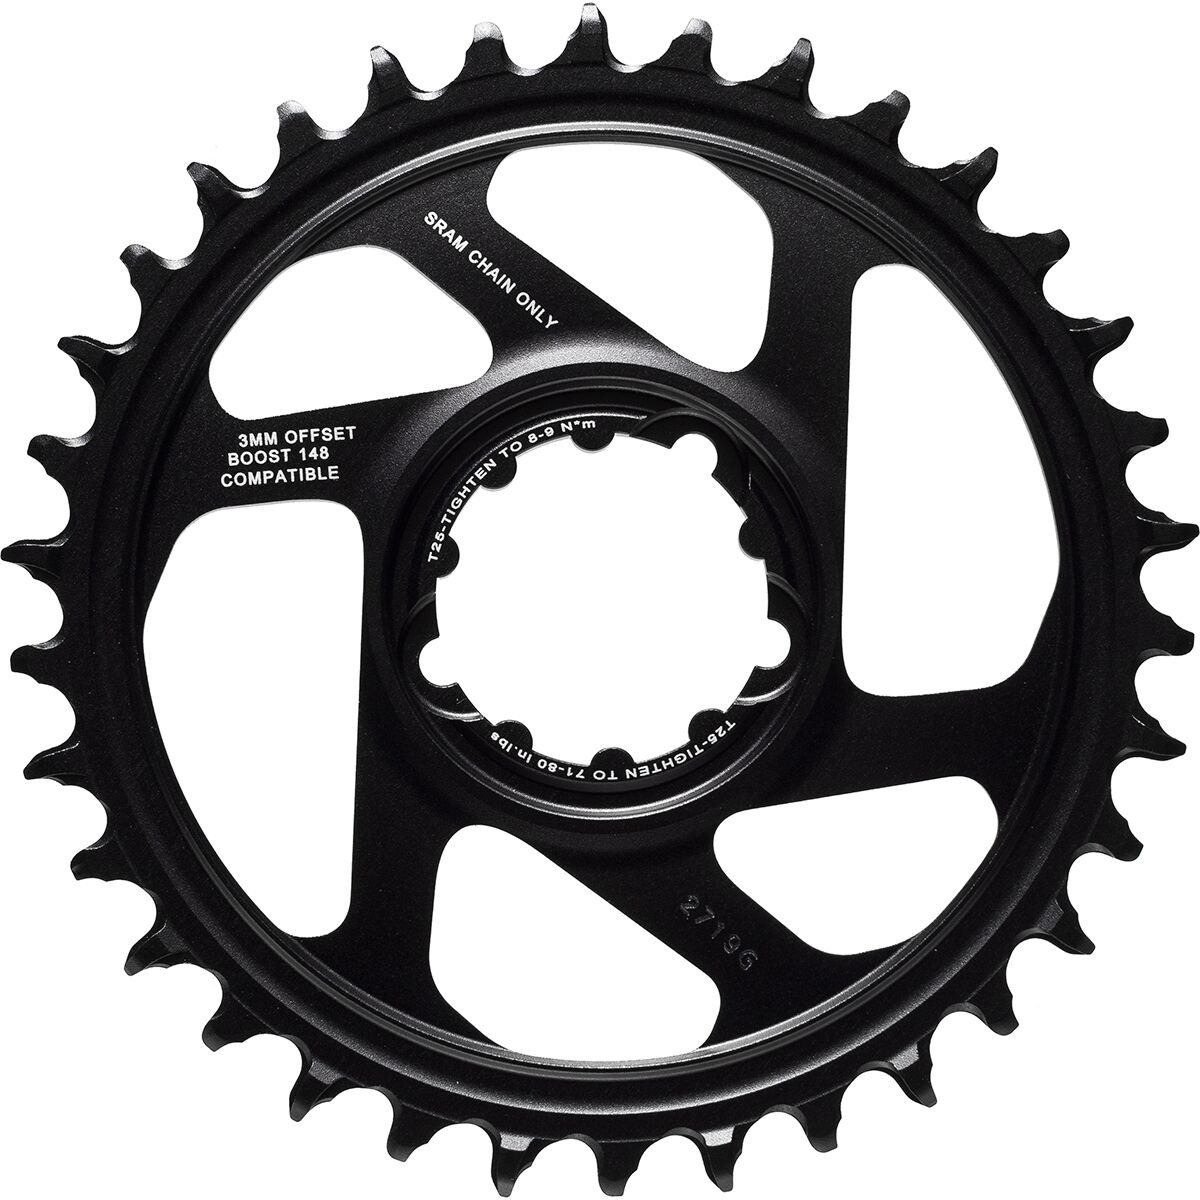 SRAM Chain Ring X-sync 2 34t Direct Mount 6mm Offset Eagle Polar Grey for sale online